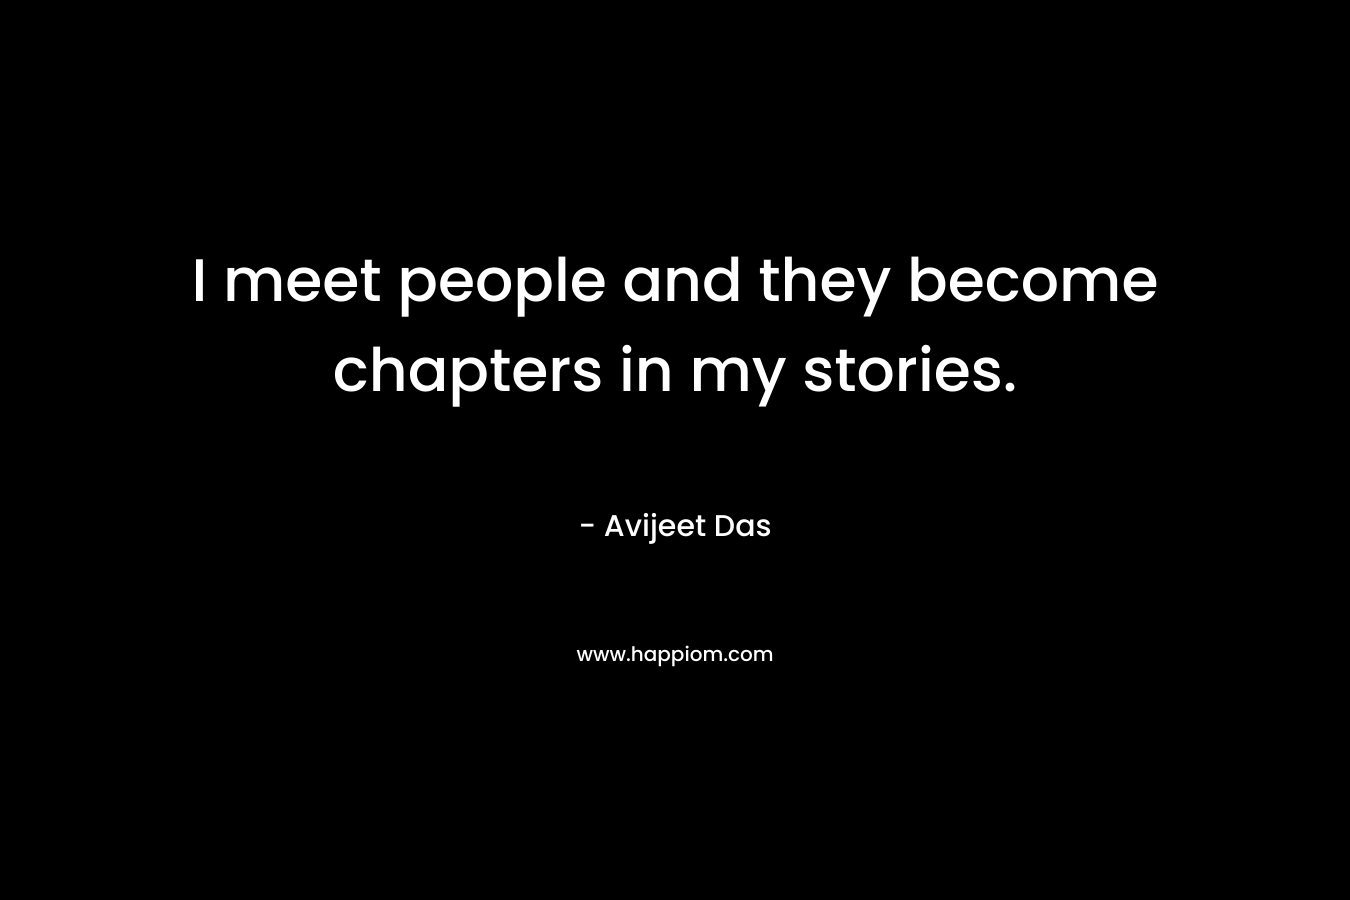 I meet people and they become chapters in my stories.